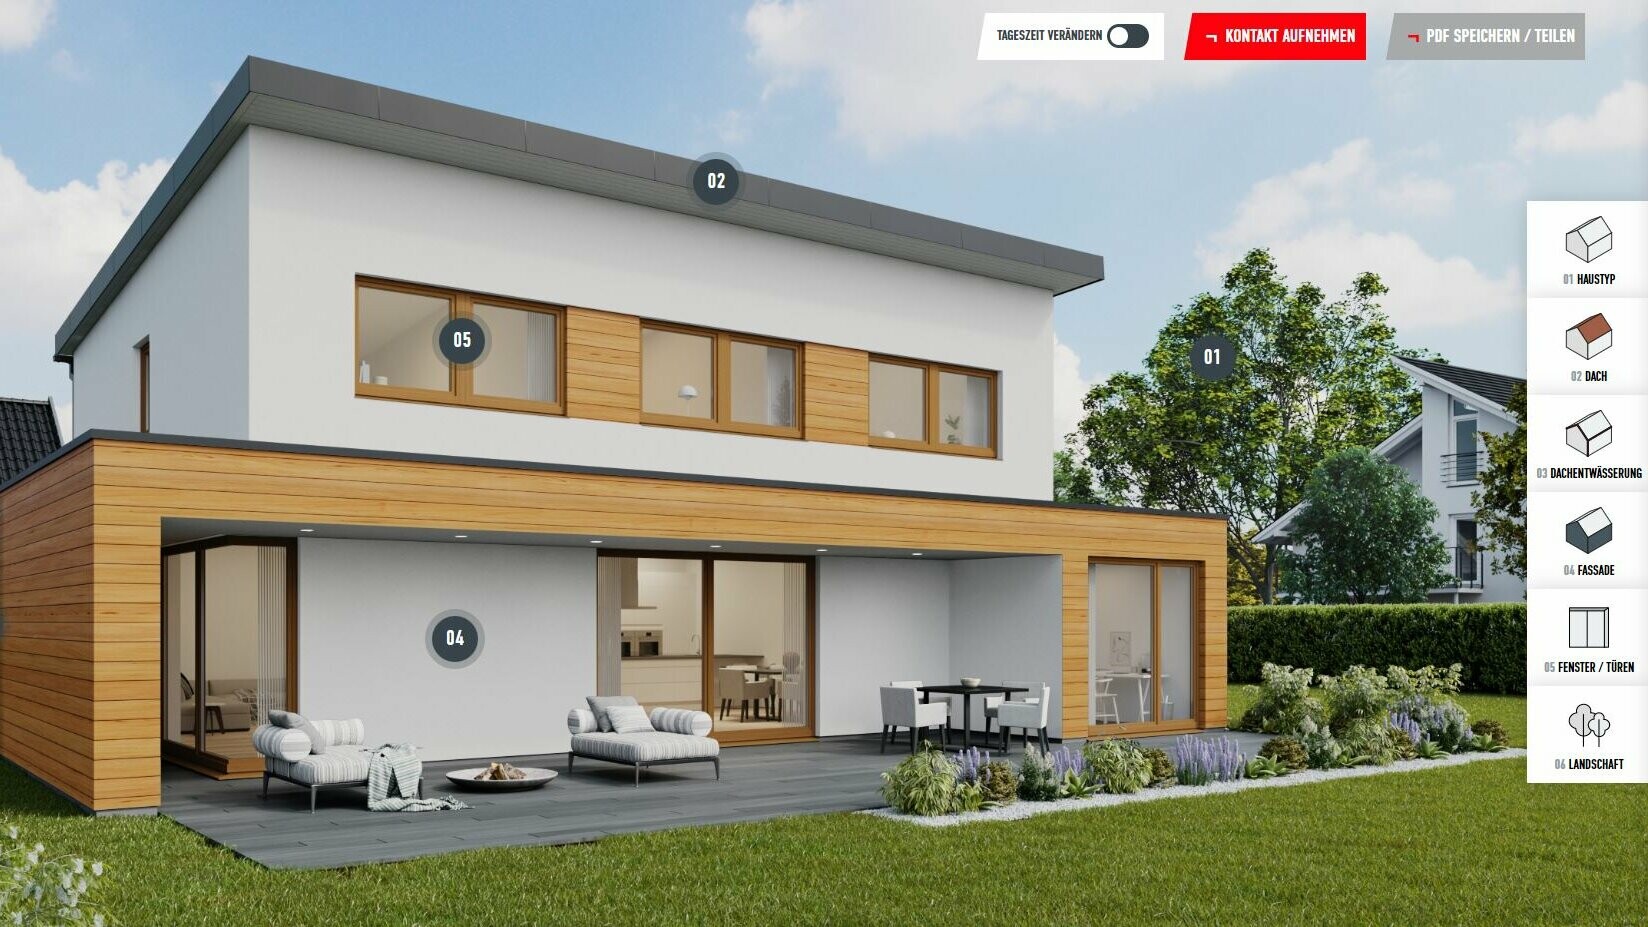 Example of a configuration view of the detached house with mono-pitched roof in the colour P.10 black including wooden elements on the façade. The house is located in the settlement area of a suburb